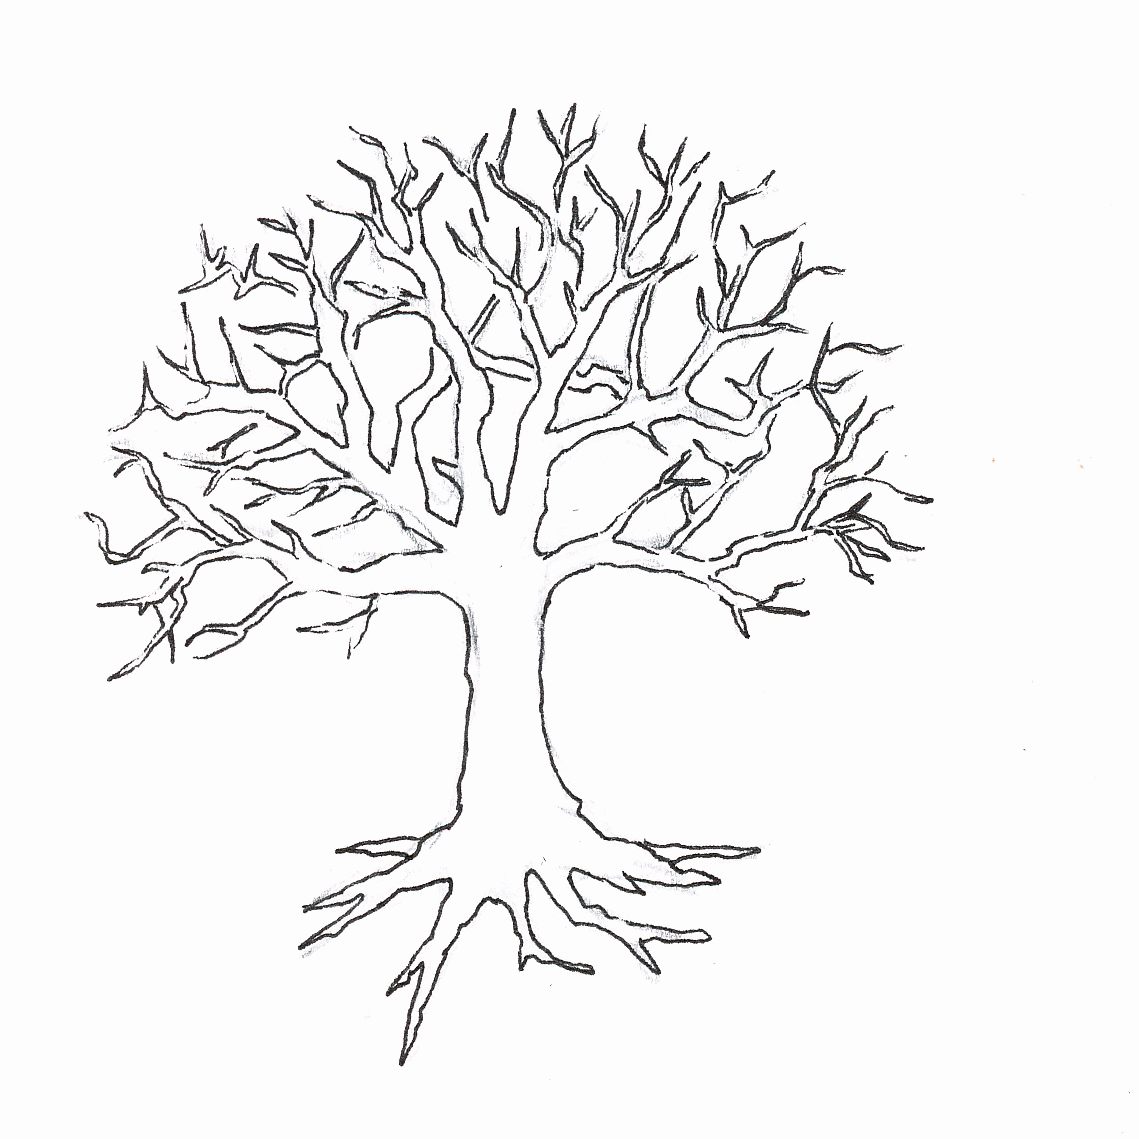 Coloring Page Of A Tree Without Leaves - Coloring